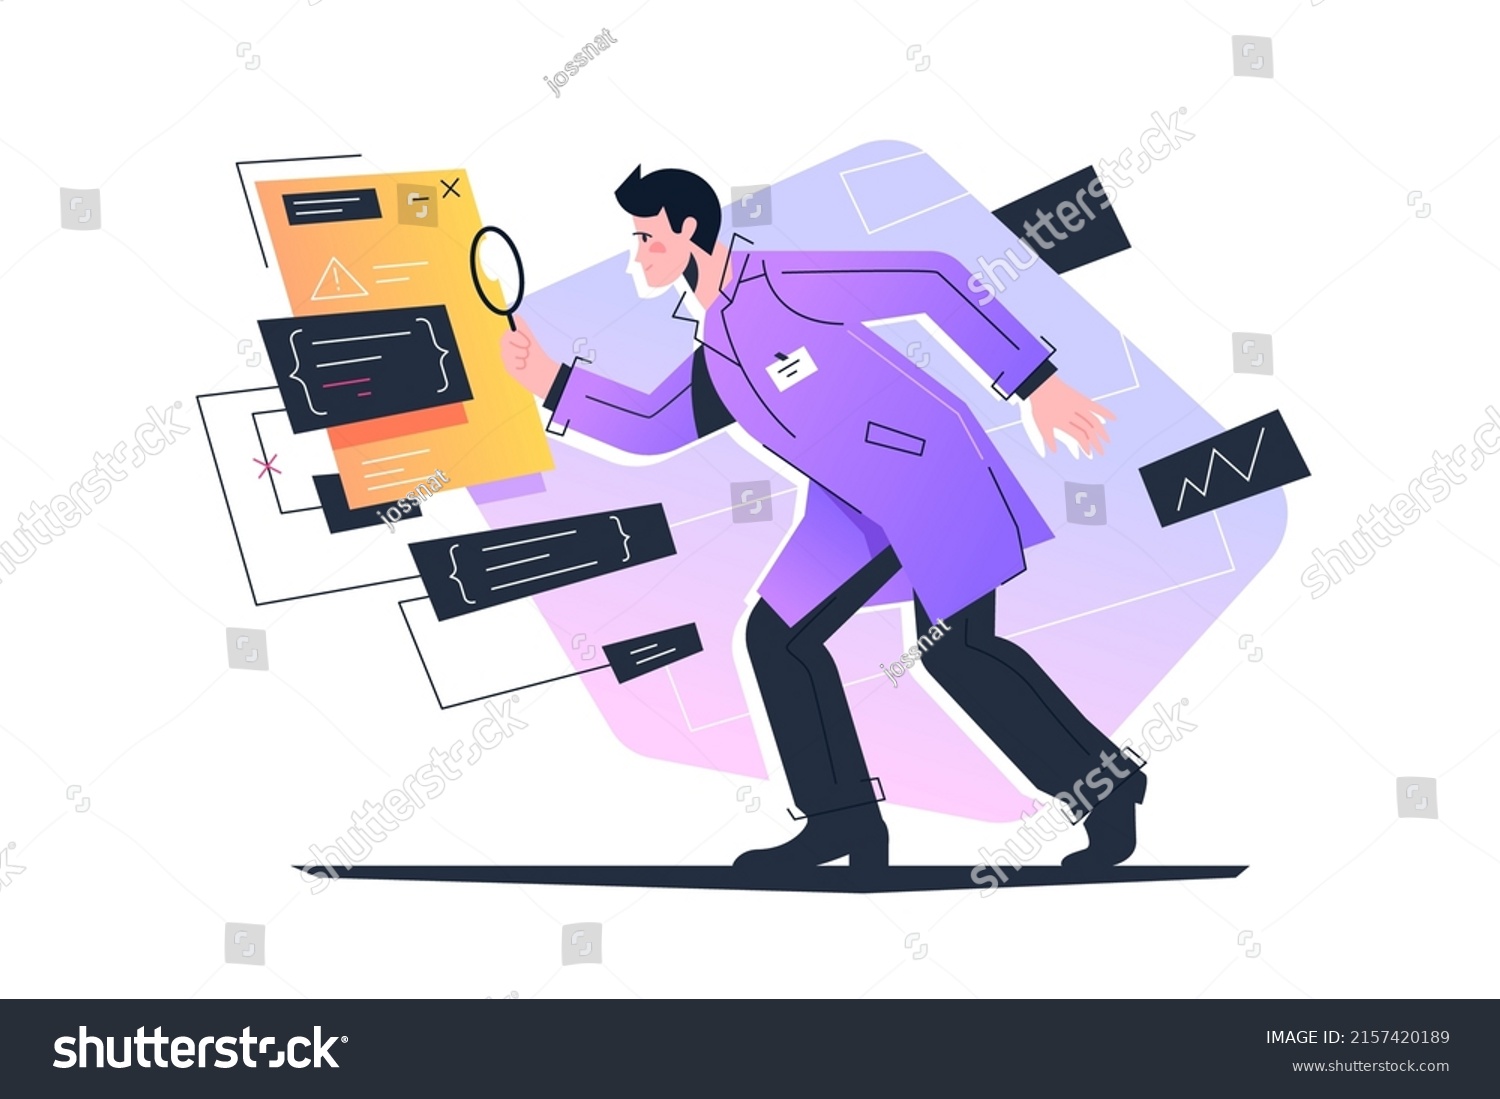 Detective, crime investigation, document with error notification vector illustration. System hacked, internet cyber security, data fraud #2157420189